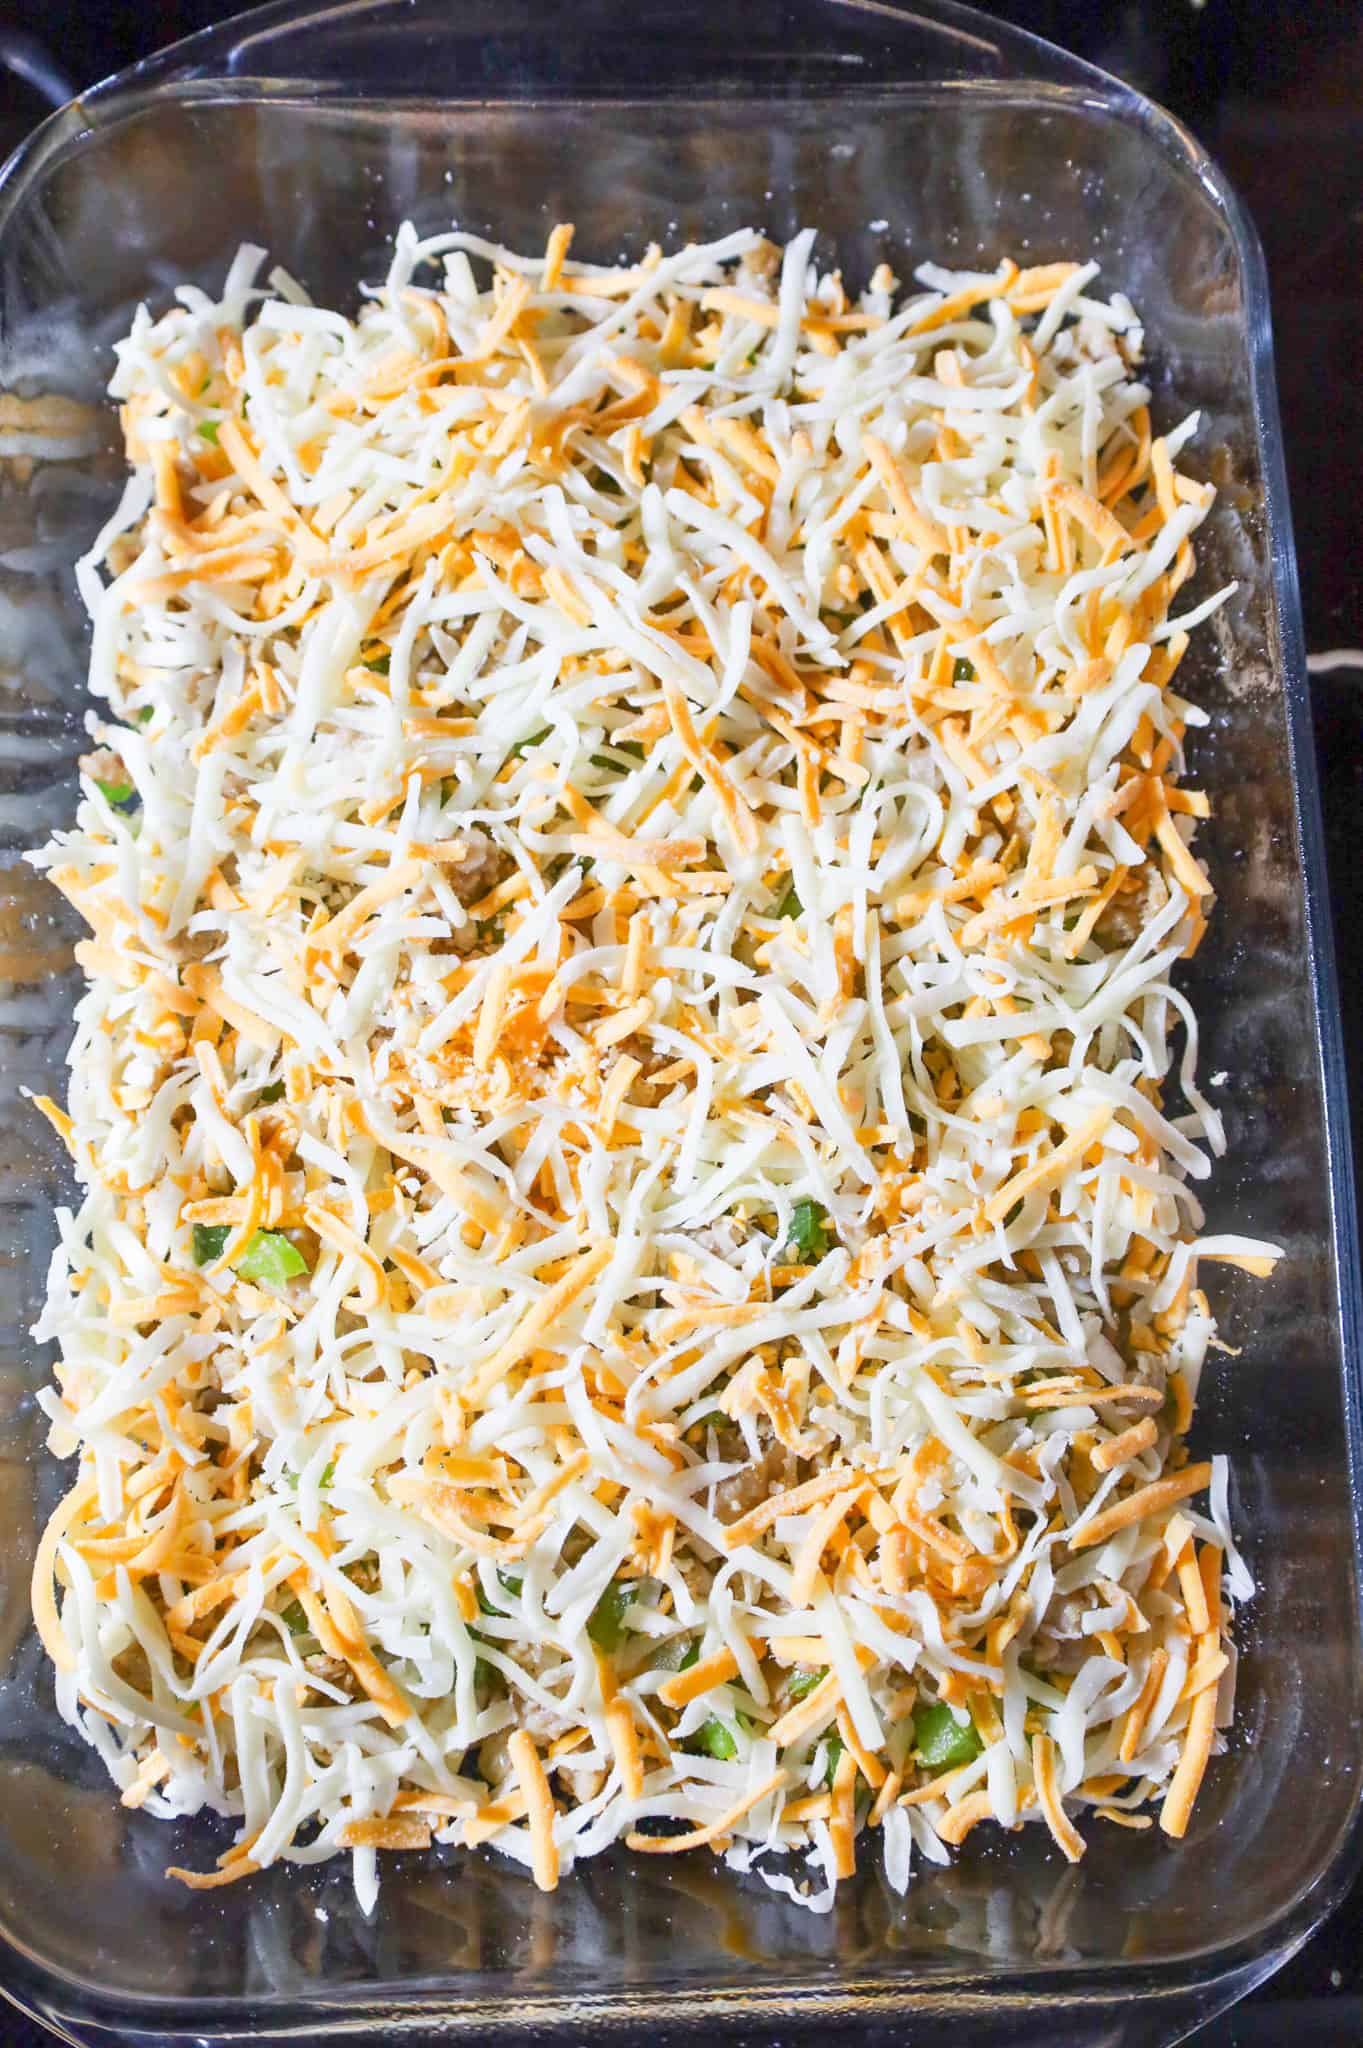 shredded cheese on top of sausage and biscuits in a baking dish